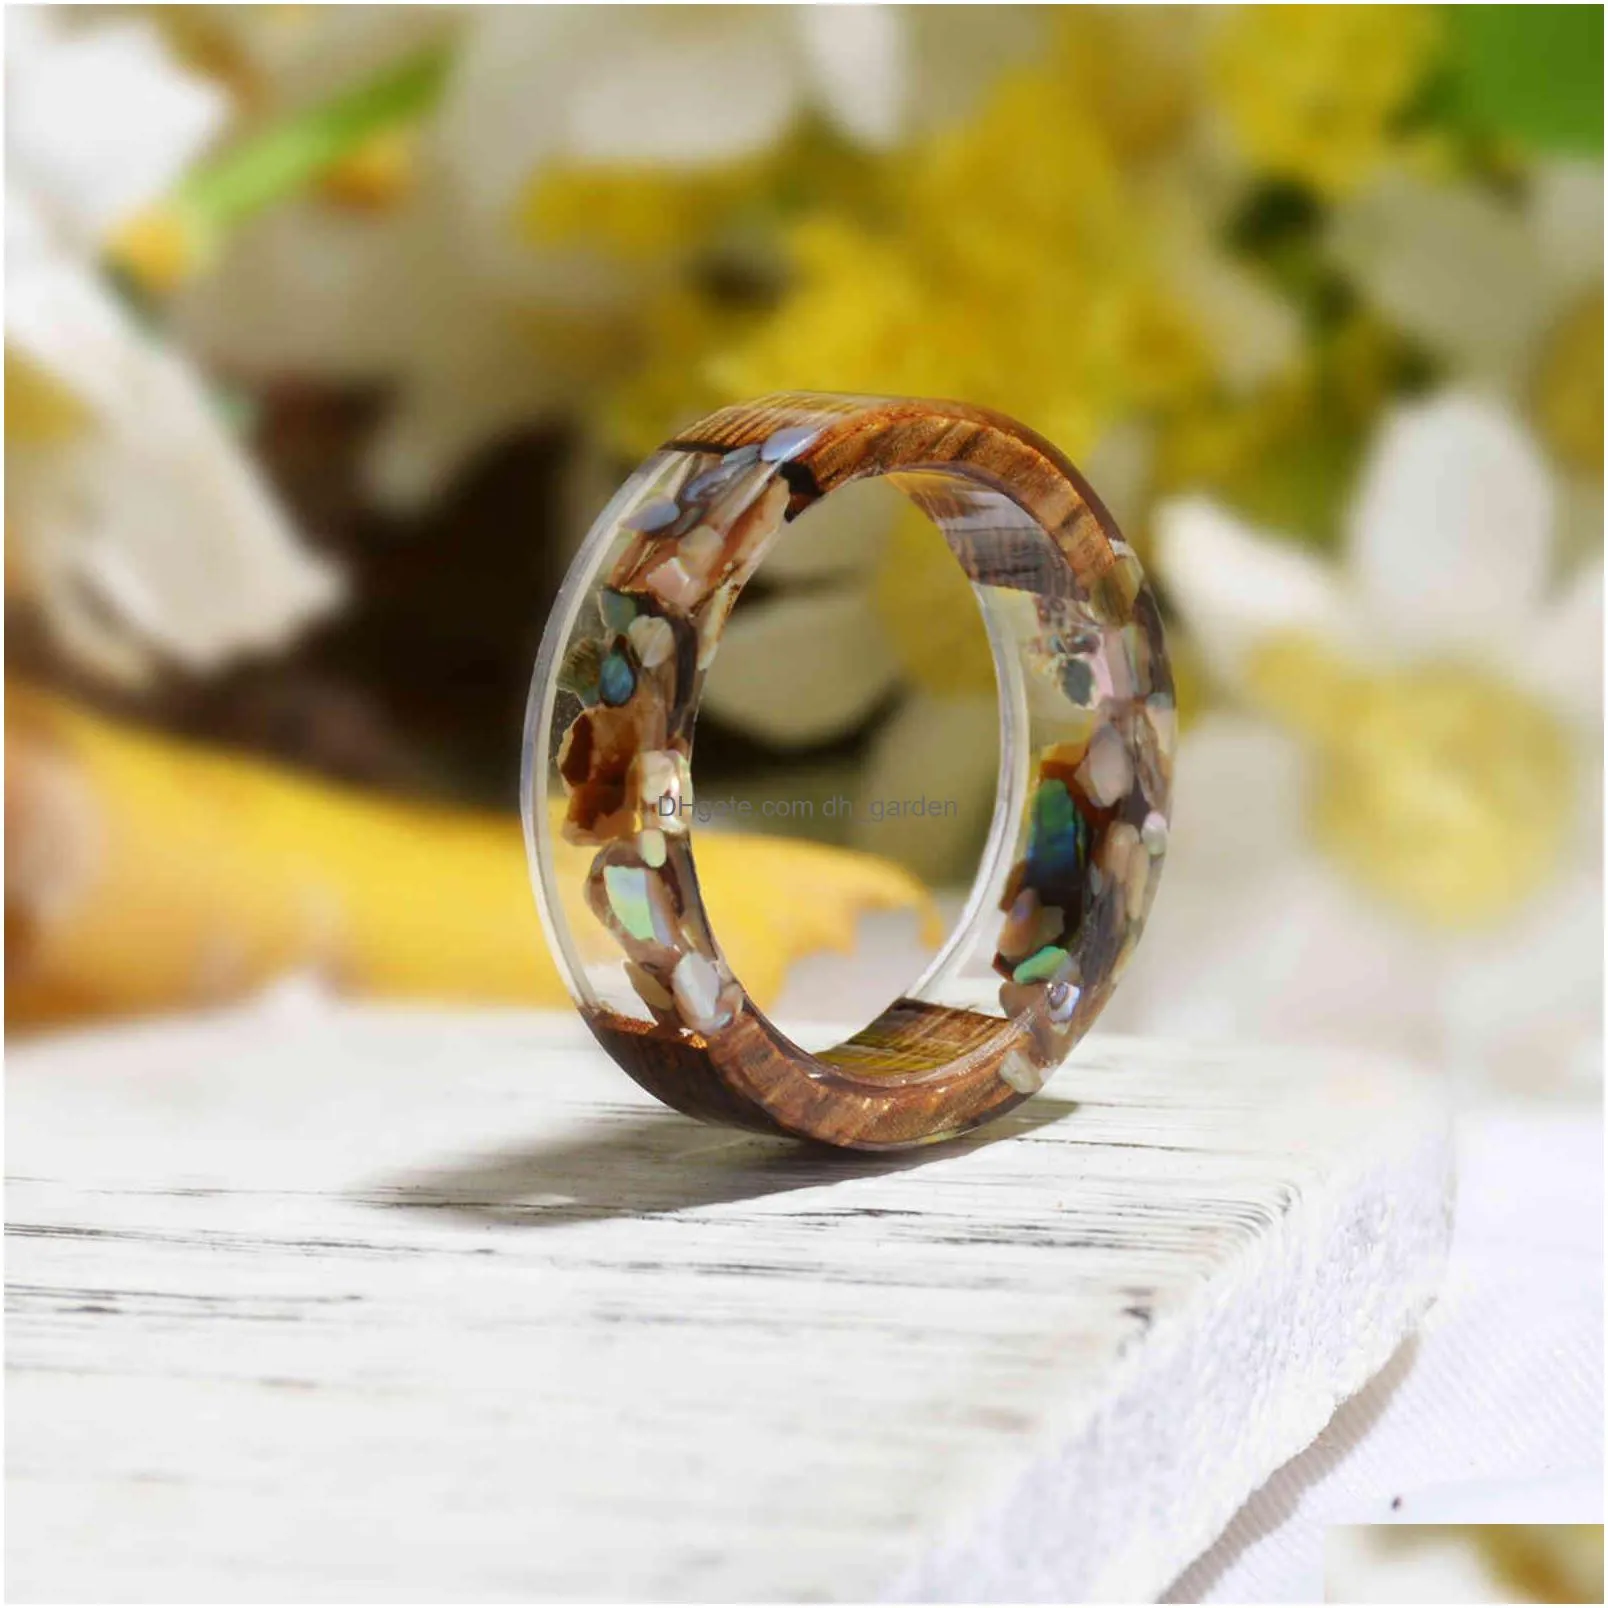 ariana handmade natural resin rings with unique dried bright flowers great gift for her